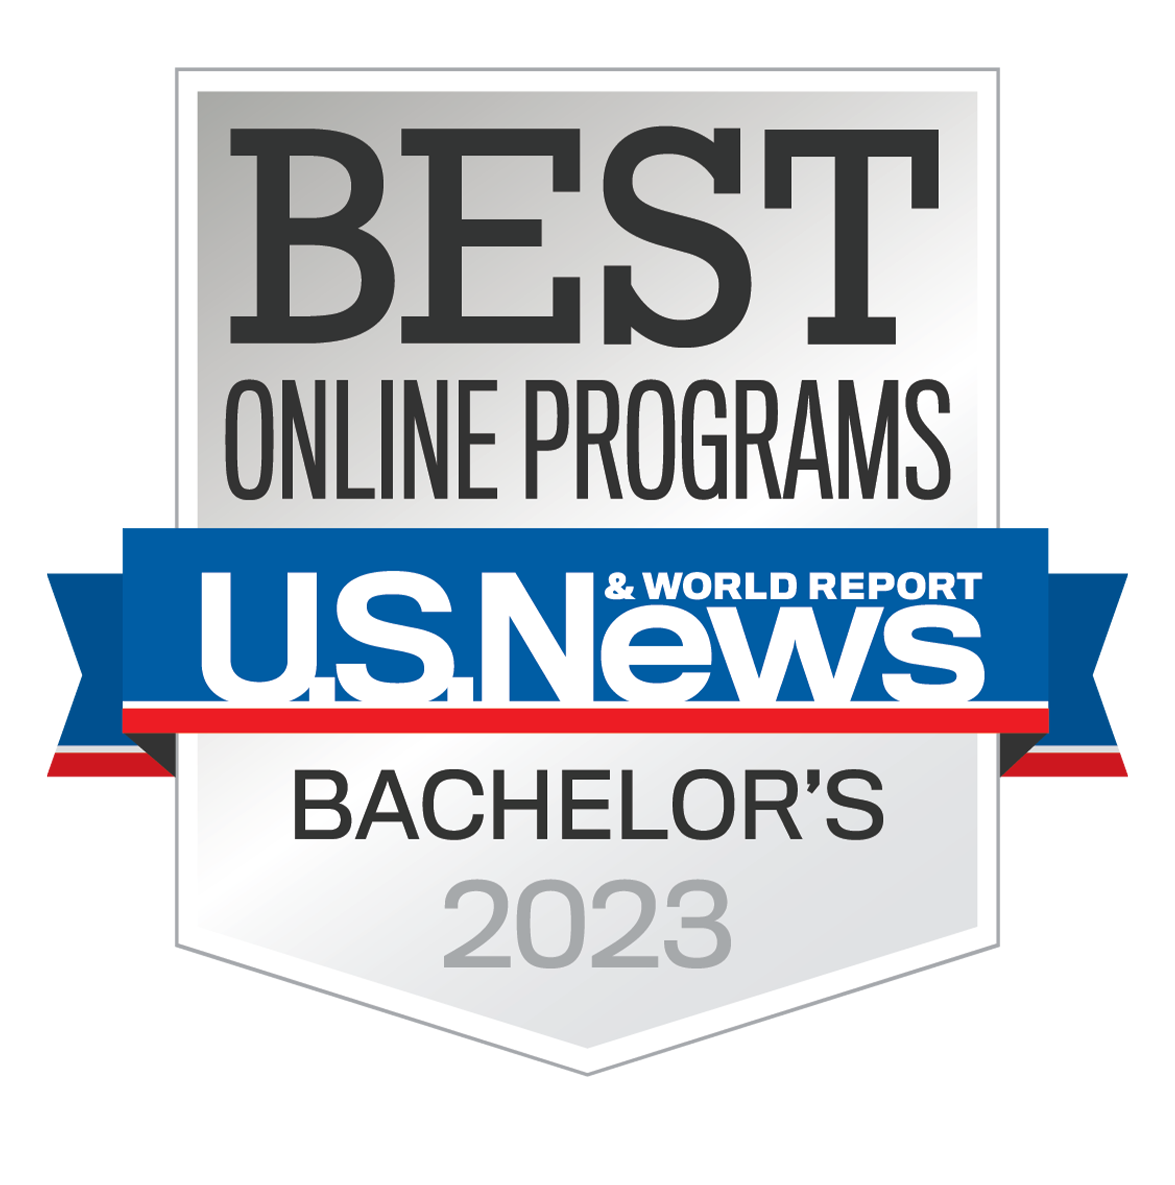 U.S. News and World reports. Best Online Programs: Bachelor's Overall 2023